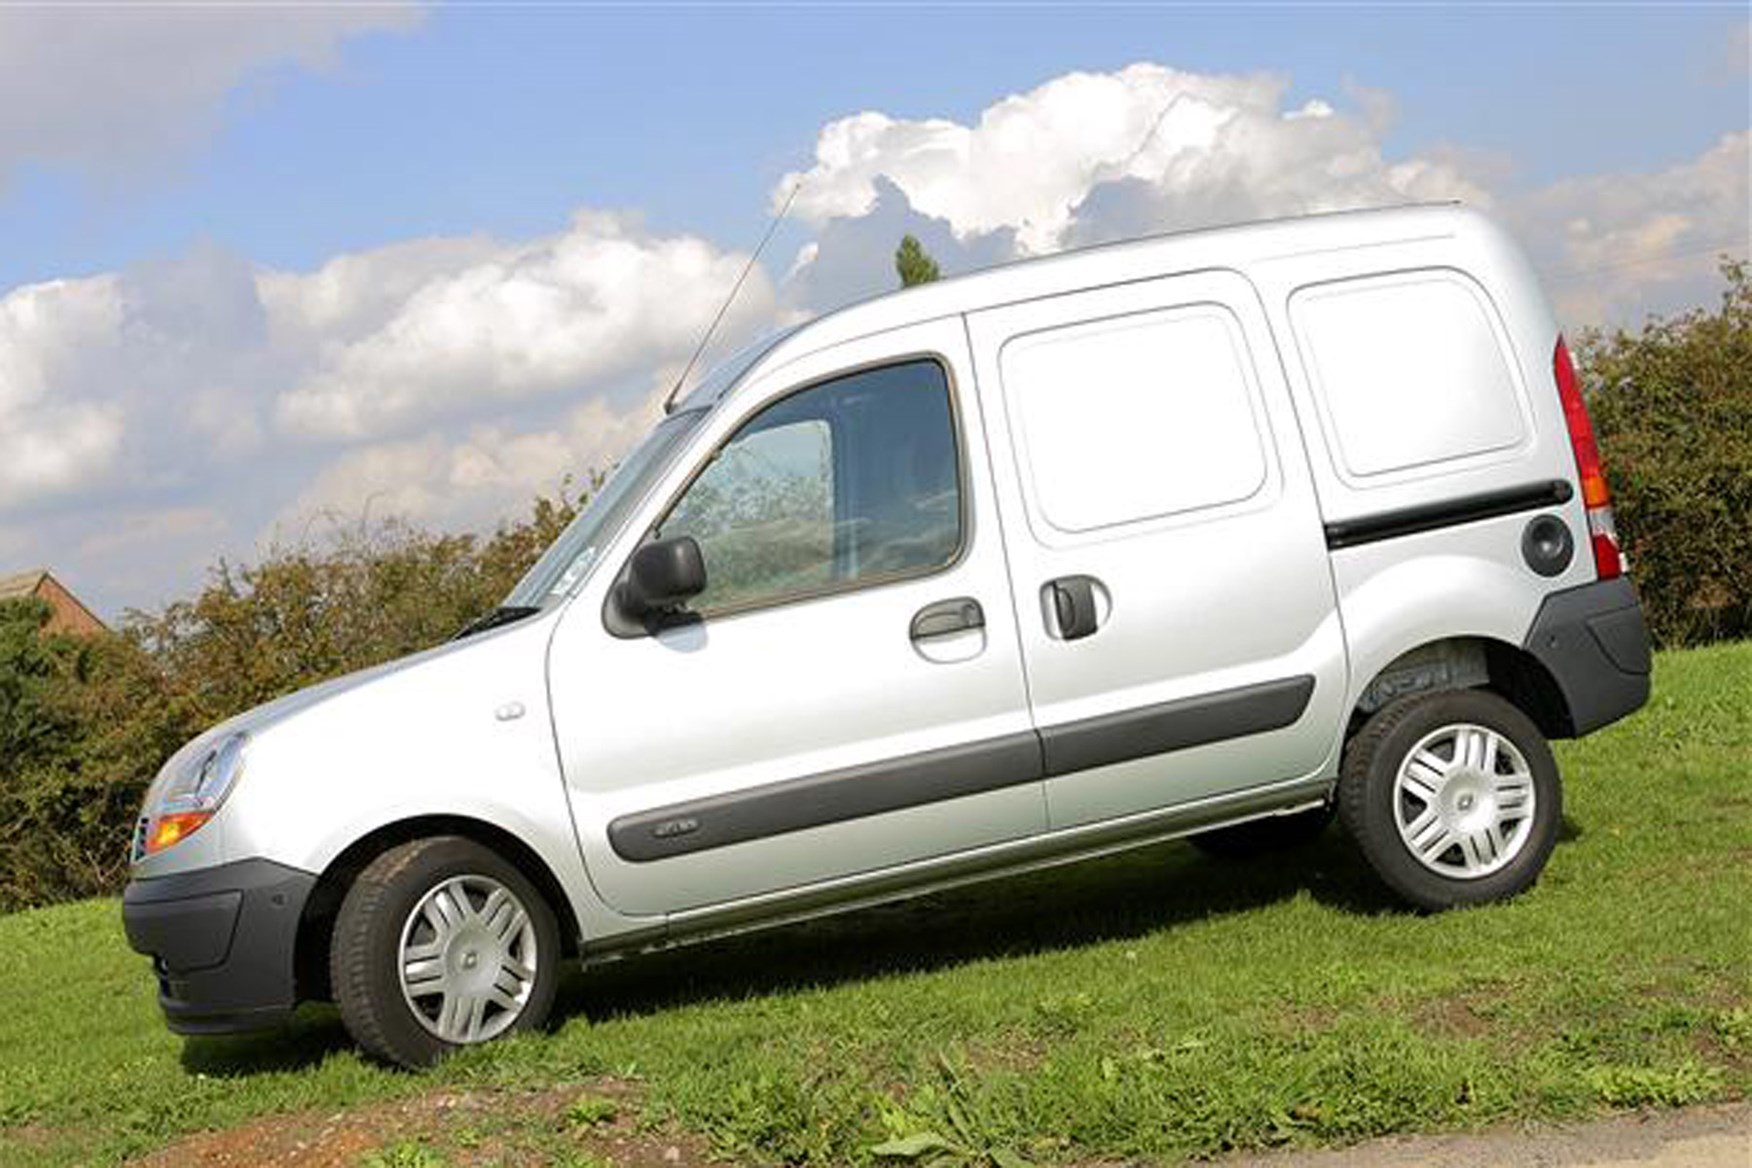 Renault Kangoo review on Parkers Vans - side exterior